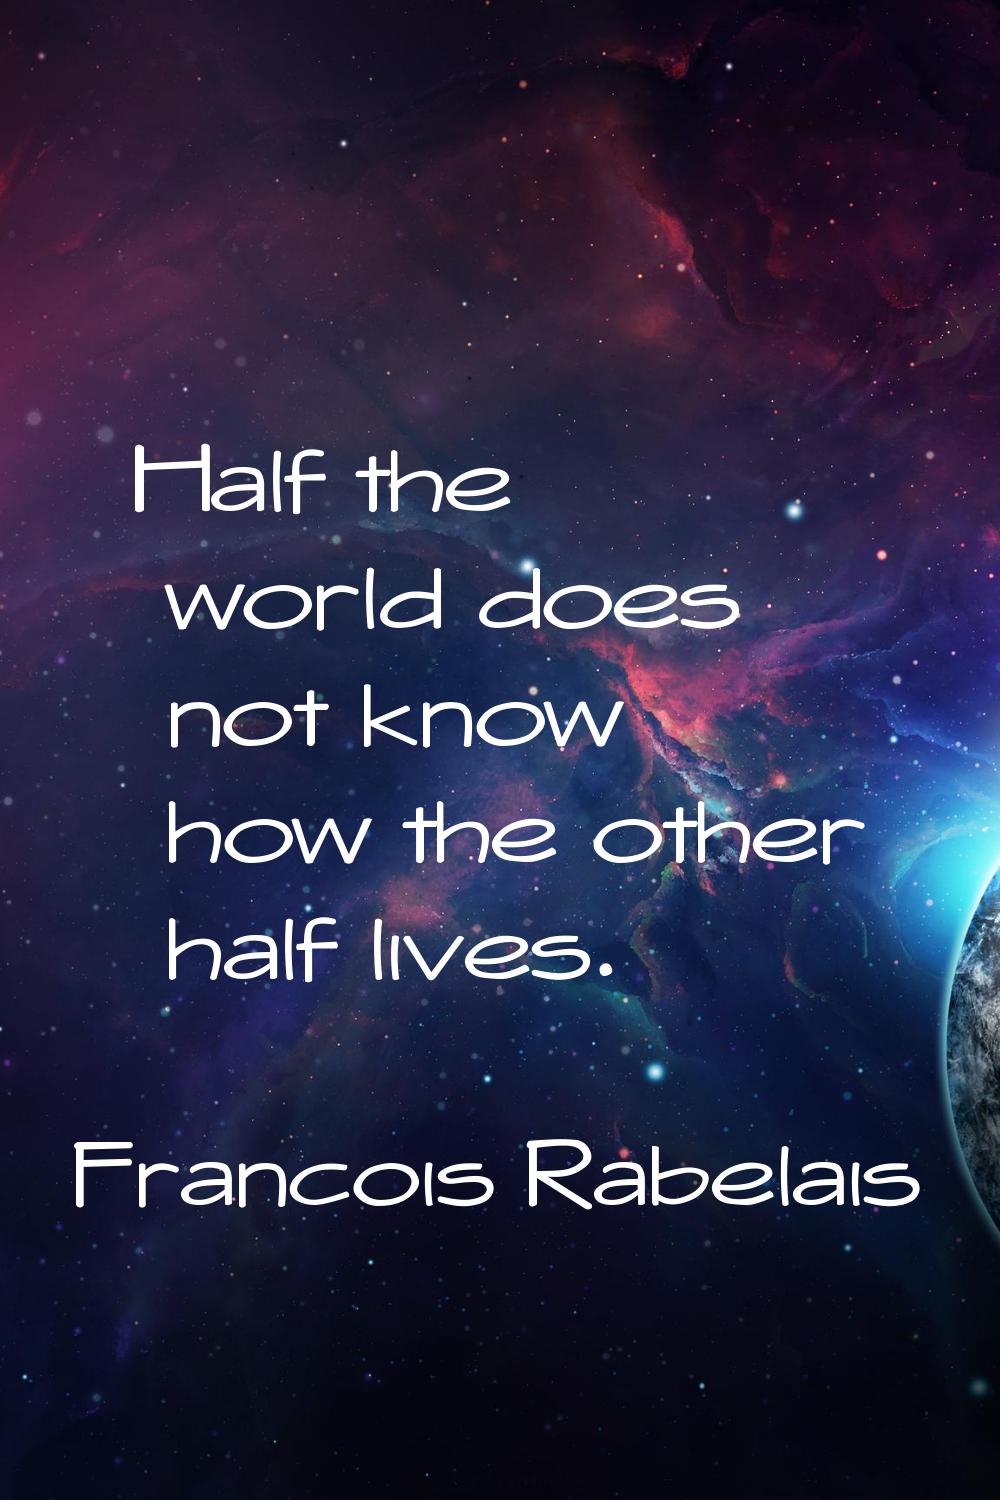 Half the world does not know how the other half lives.